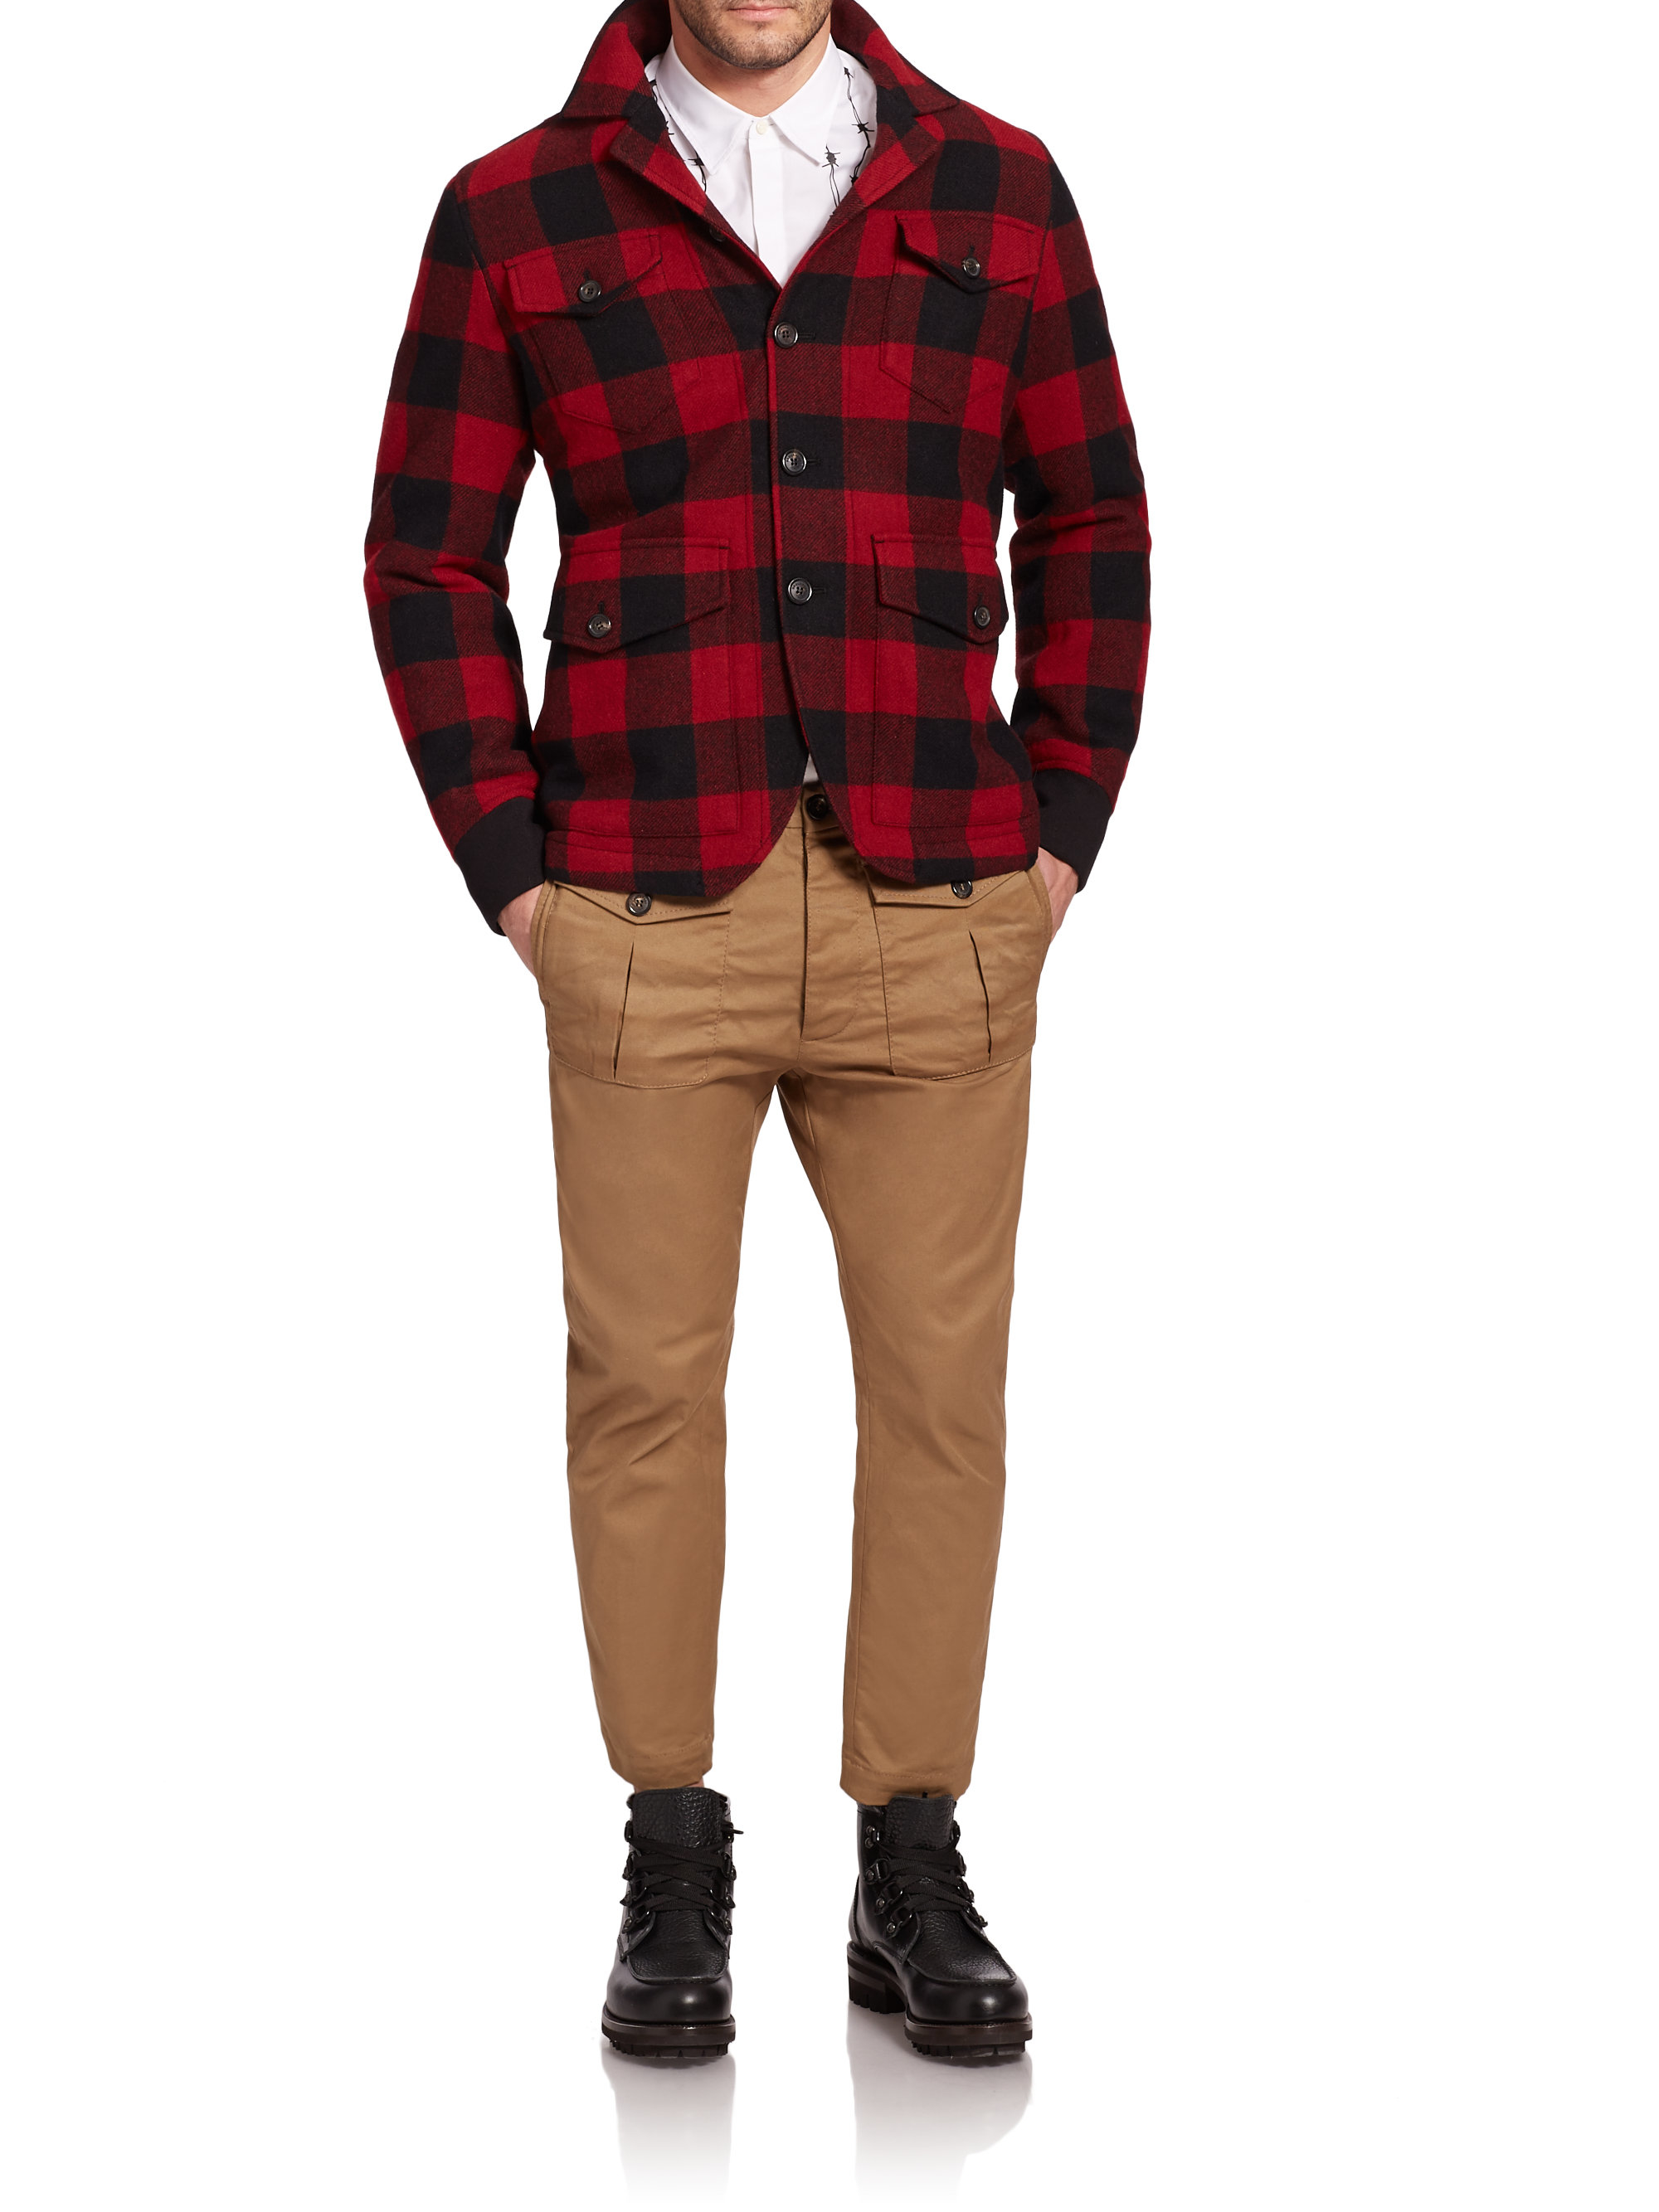 DSquared² Buffalo Plaid Wool Jacket in Red-Black (Black) for Men - Lyst